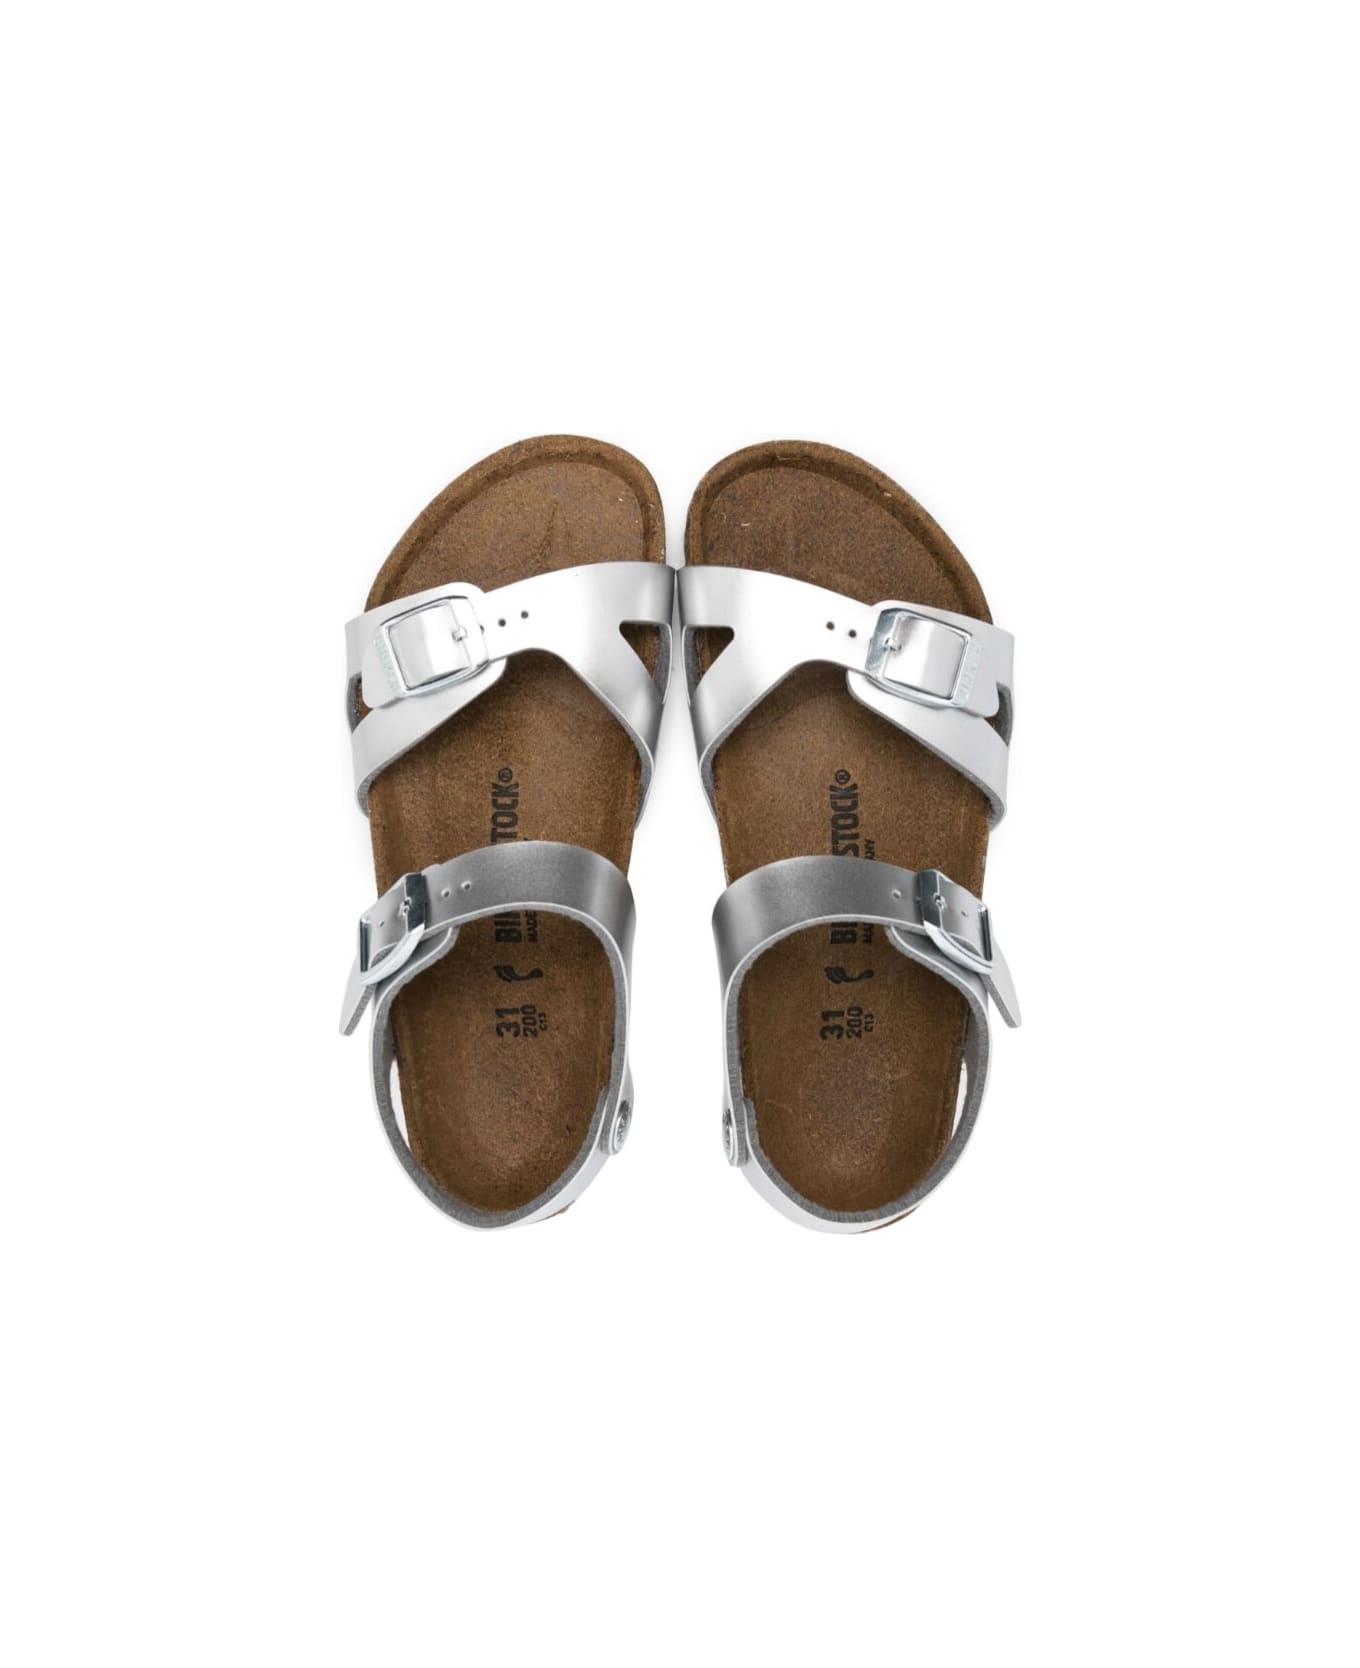 Birkenstock 'rio' Silver-colored Flat Sandals With Double Strap In Metallic Faux Leather Girl - Metallic